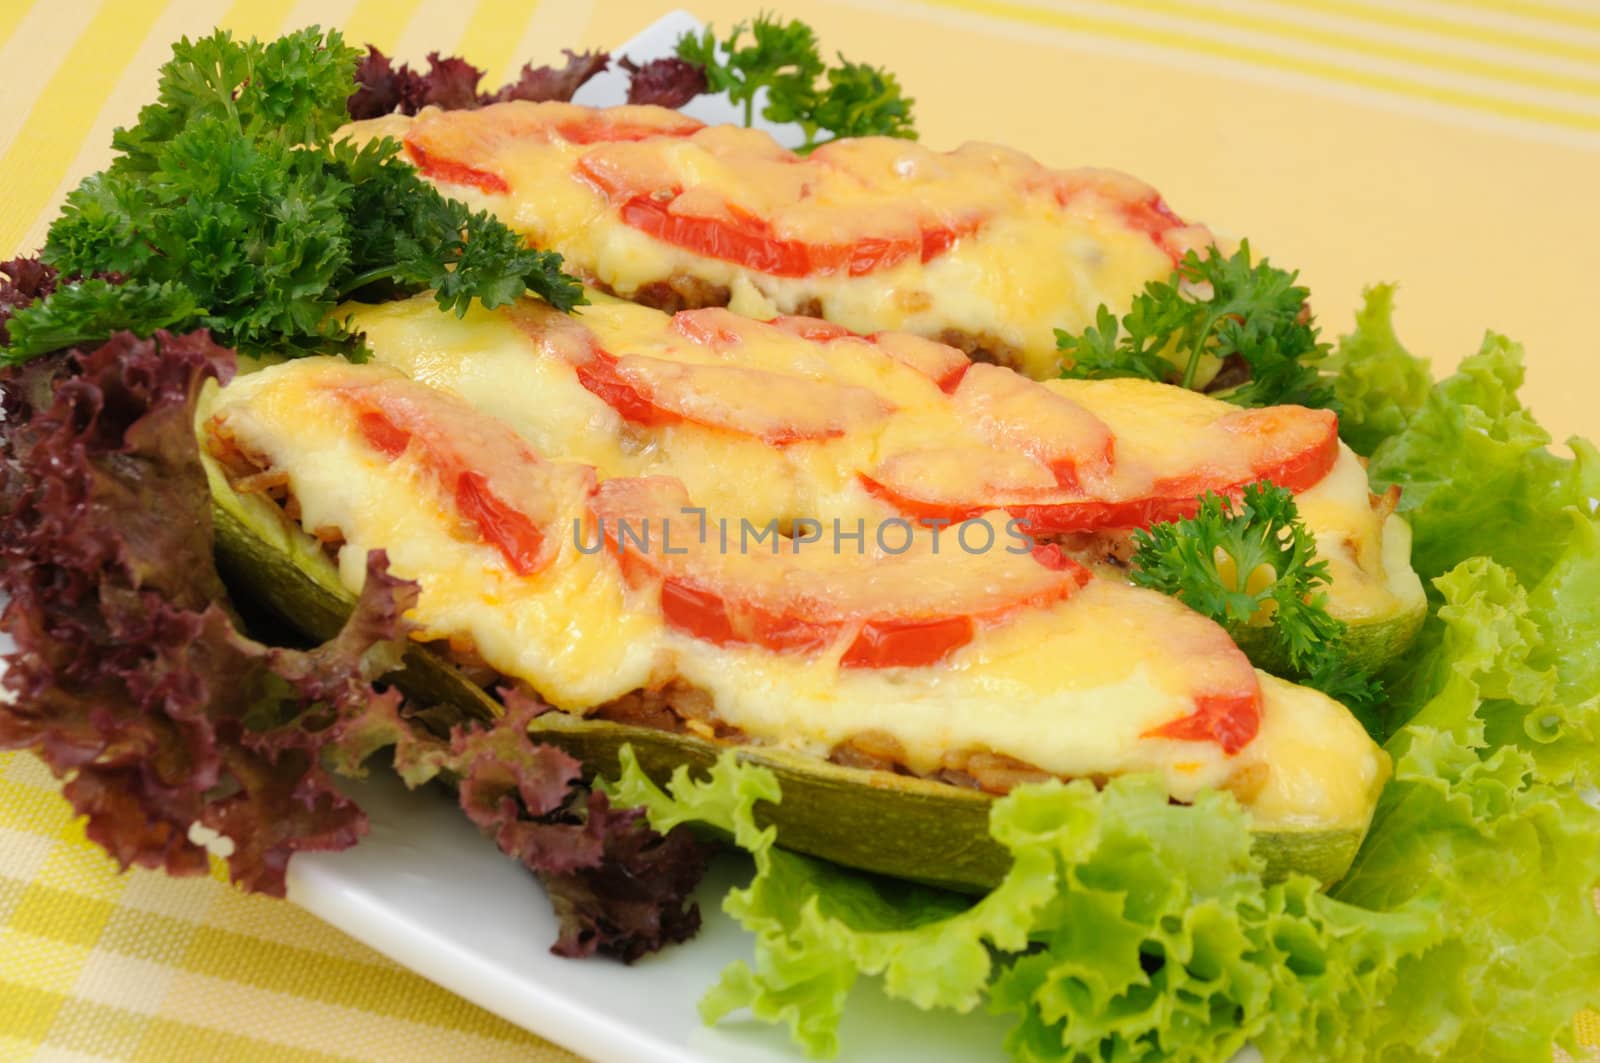 Stuffed zucchini with a mixture of vegetables with tomato and cheese with herbs